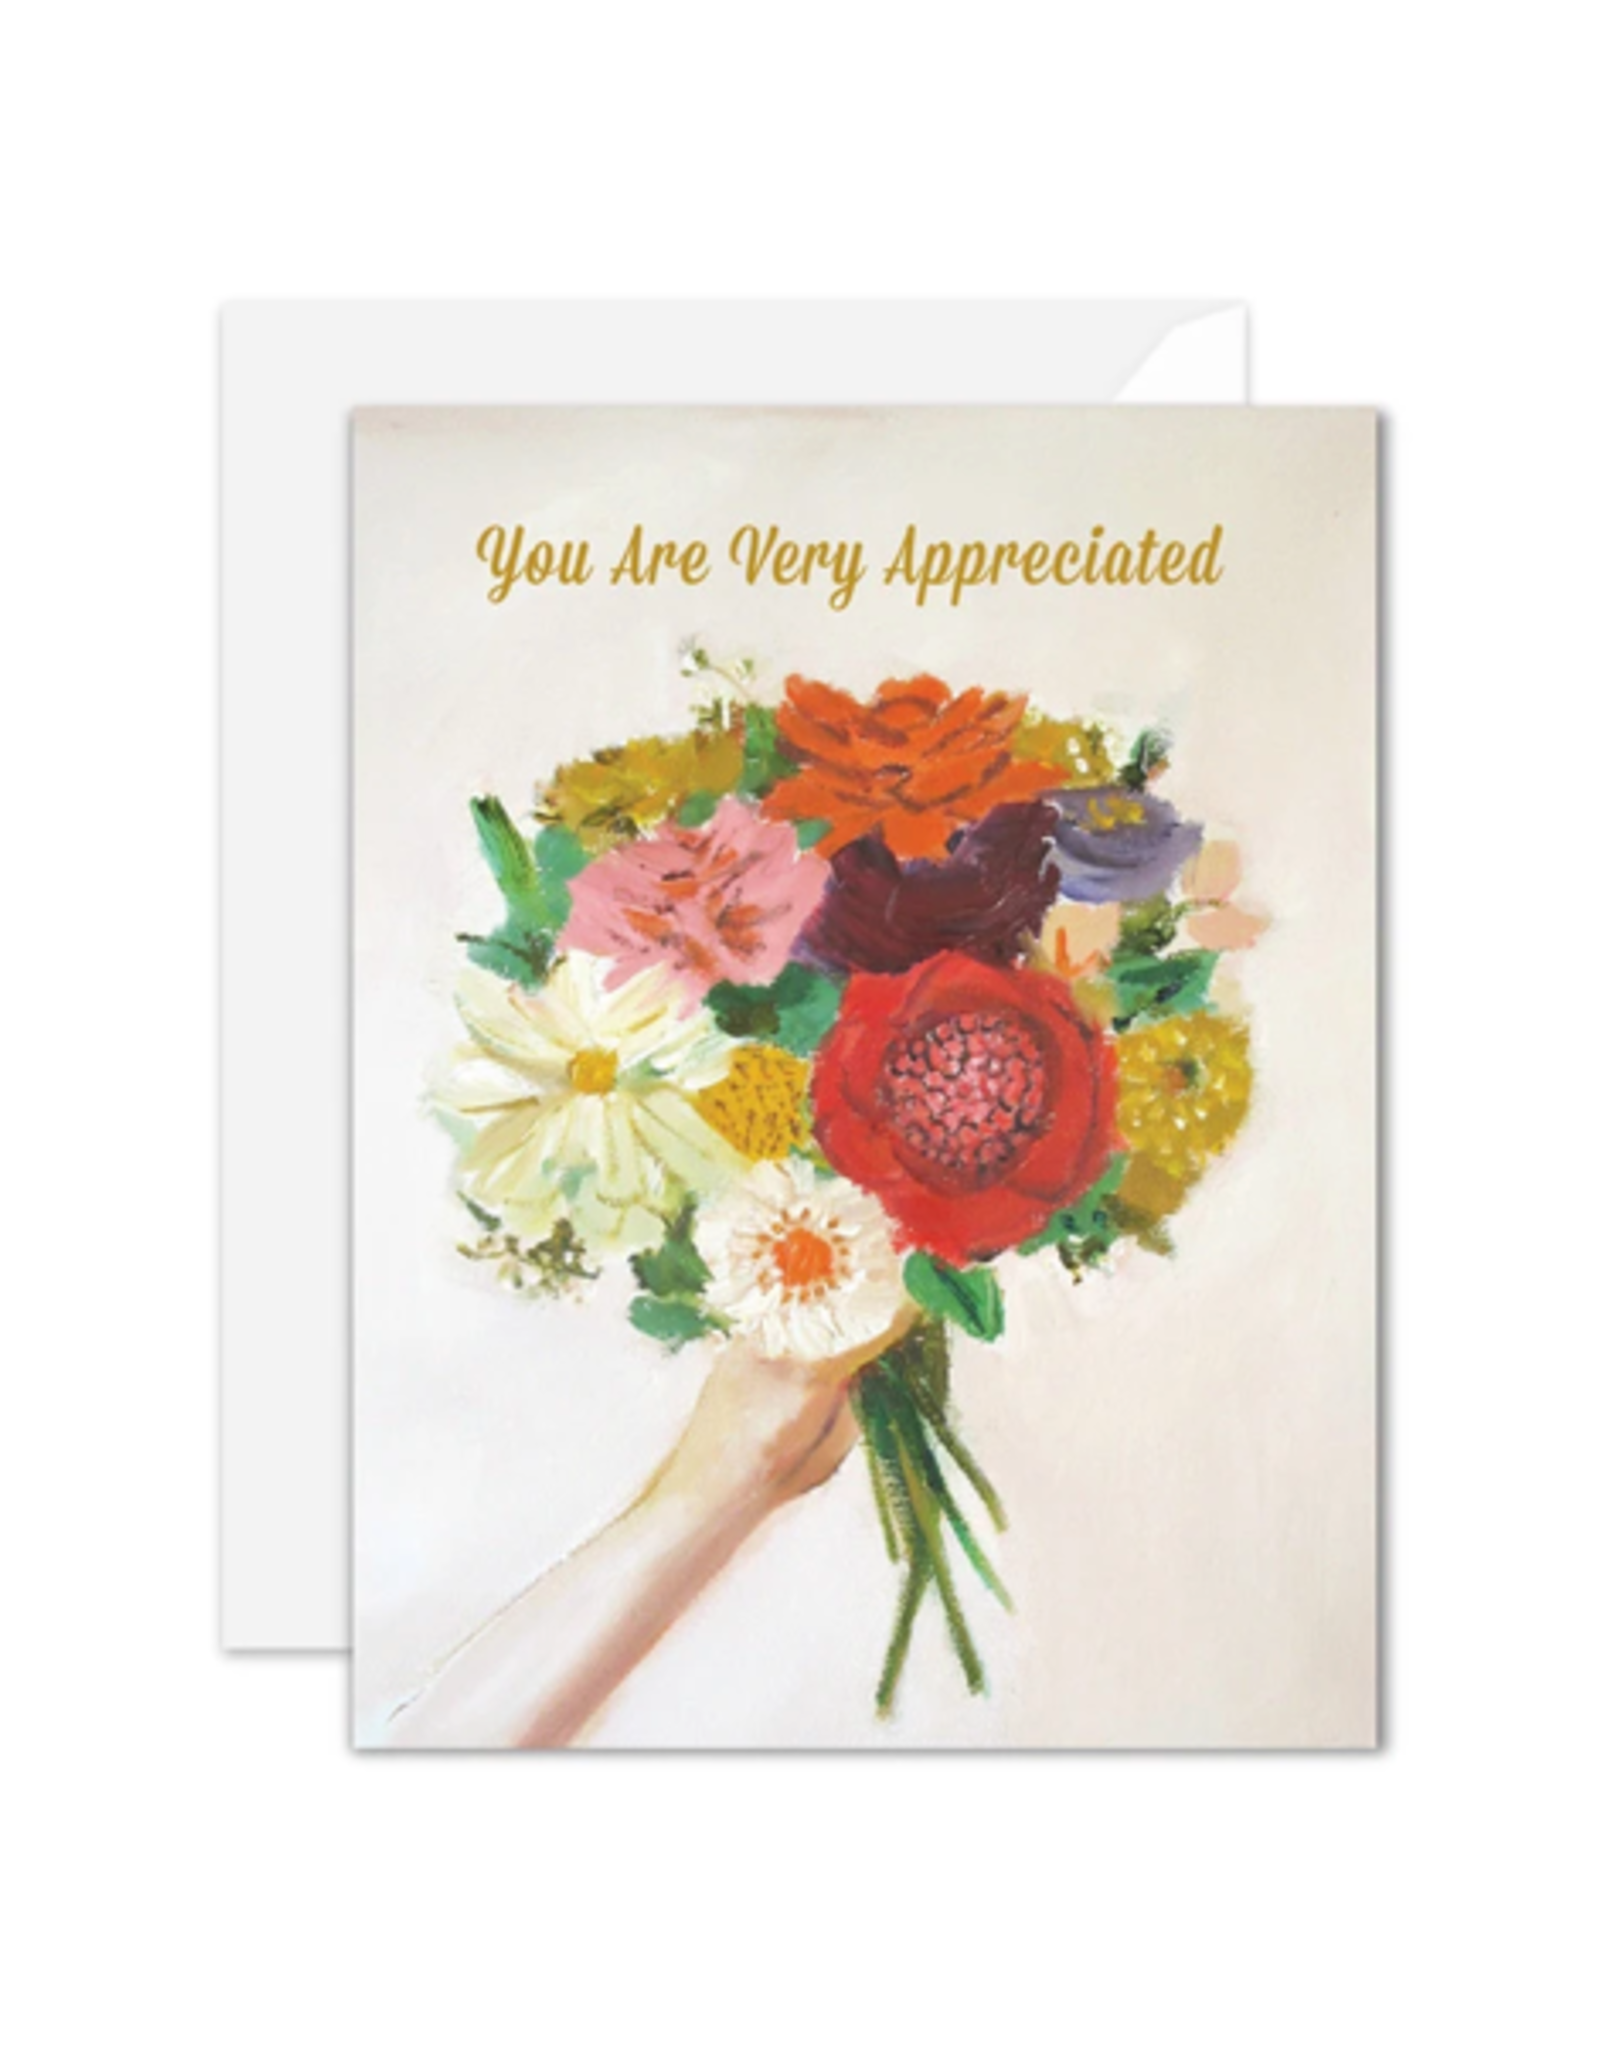 Janet Hill - Card / You are Very Appreciated, 4.25 x 5.5"